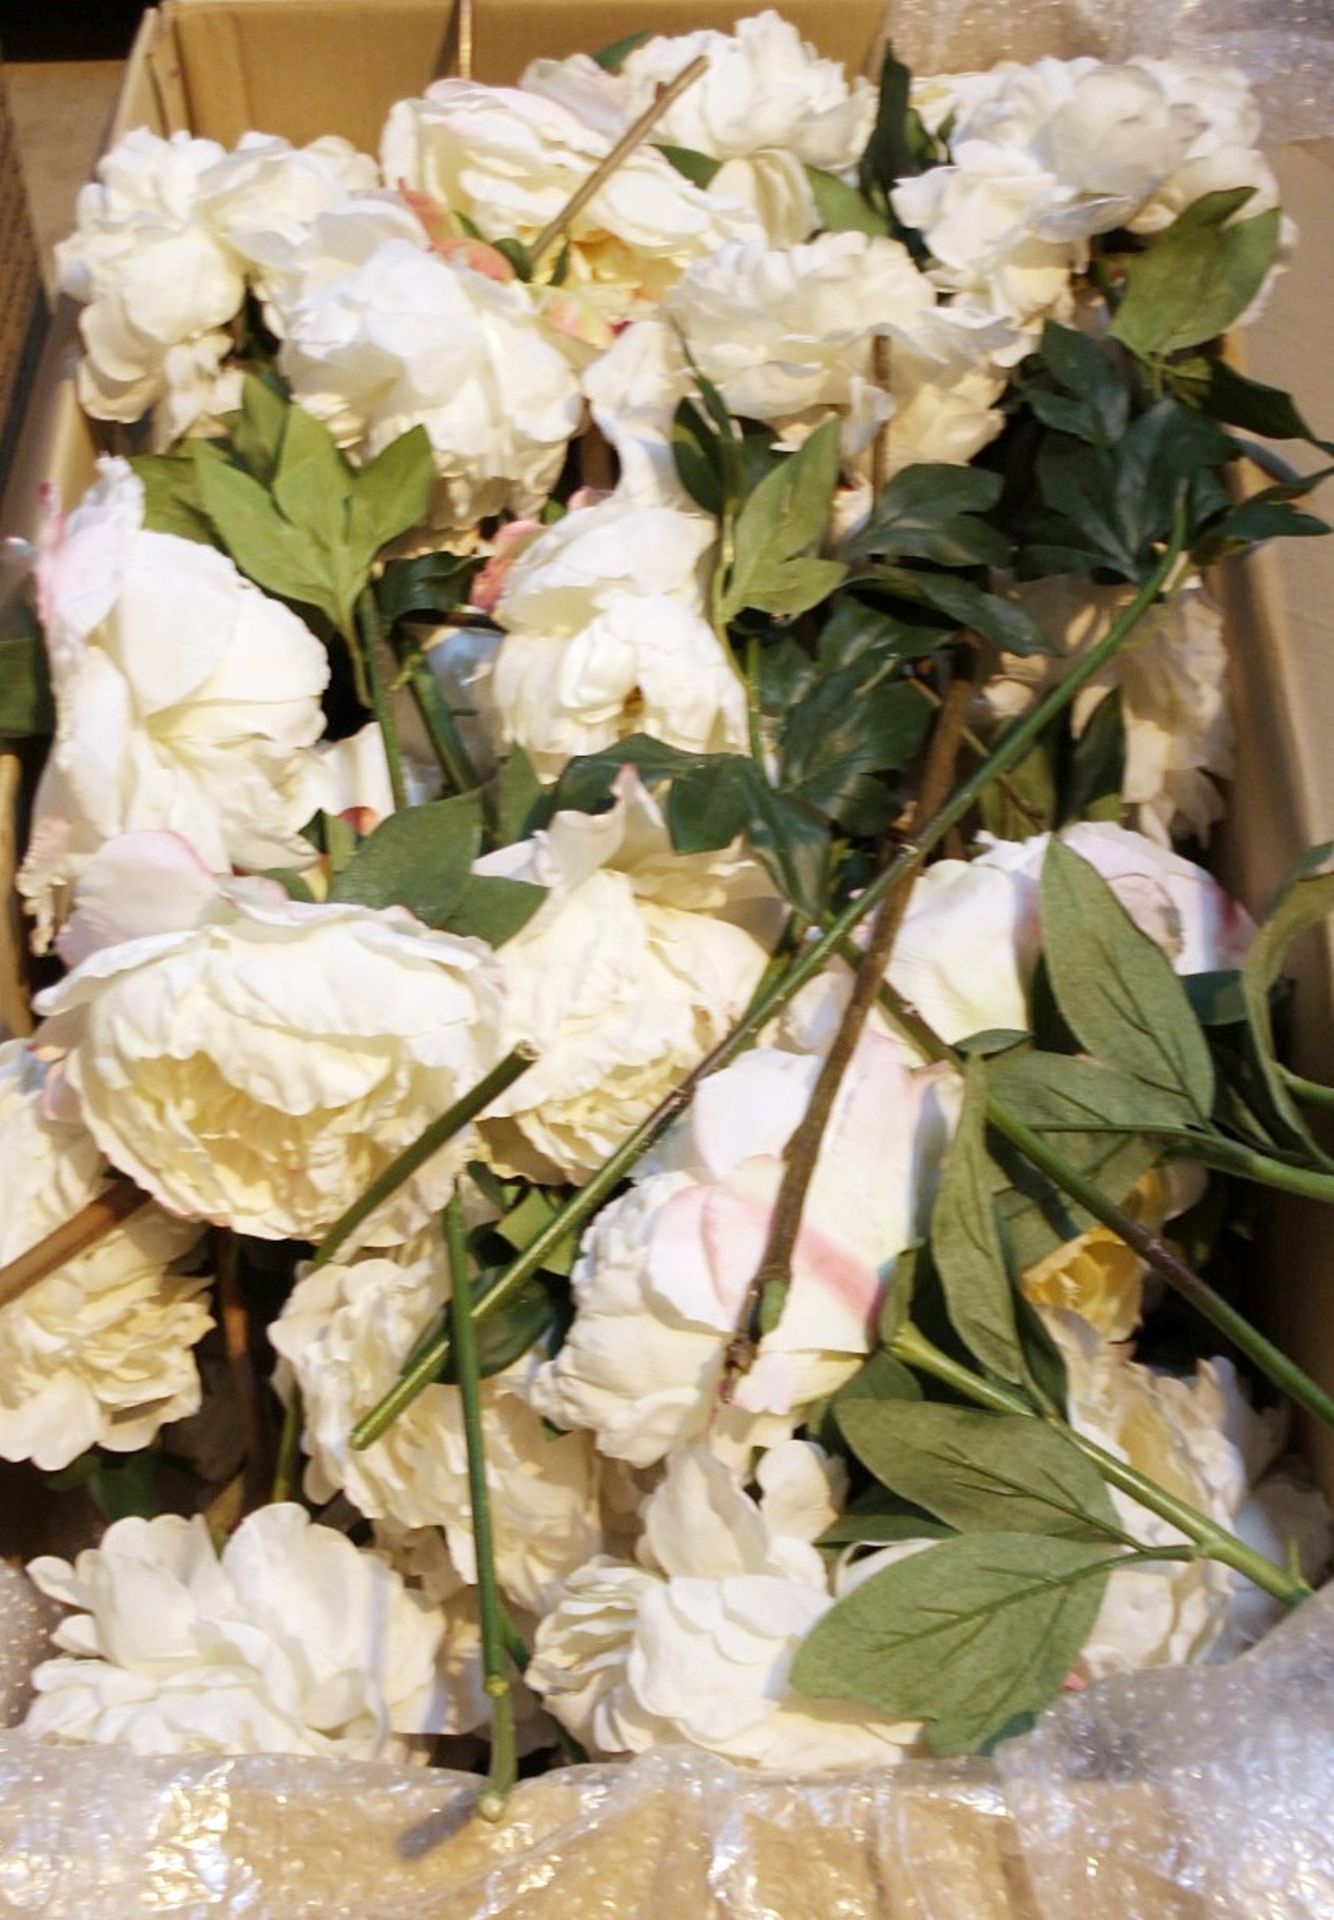 Large Quantity Of Premium Artificial Silk Flowers In Whites And Pinks - Approximately 100 pcs - Image 6 of 6